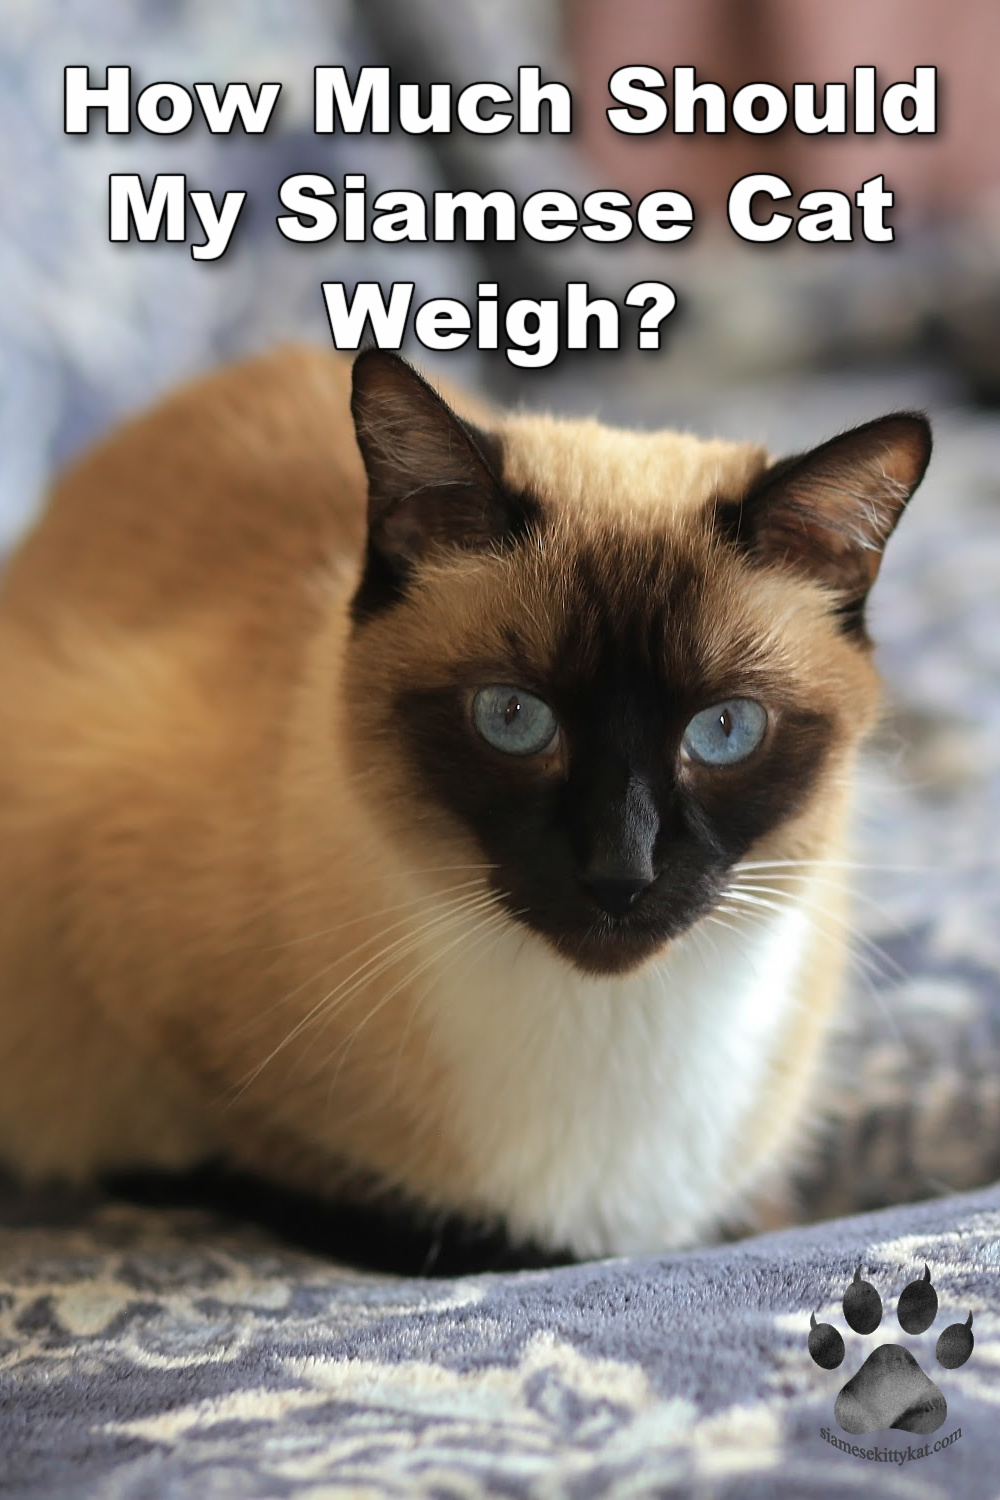 How Much Should My Siamese Cat Weigh? – Siamese Cats Rule